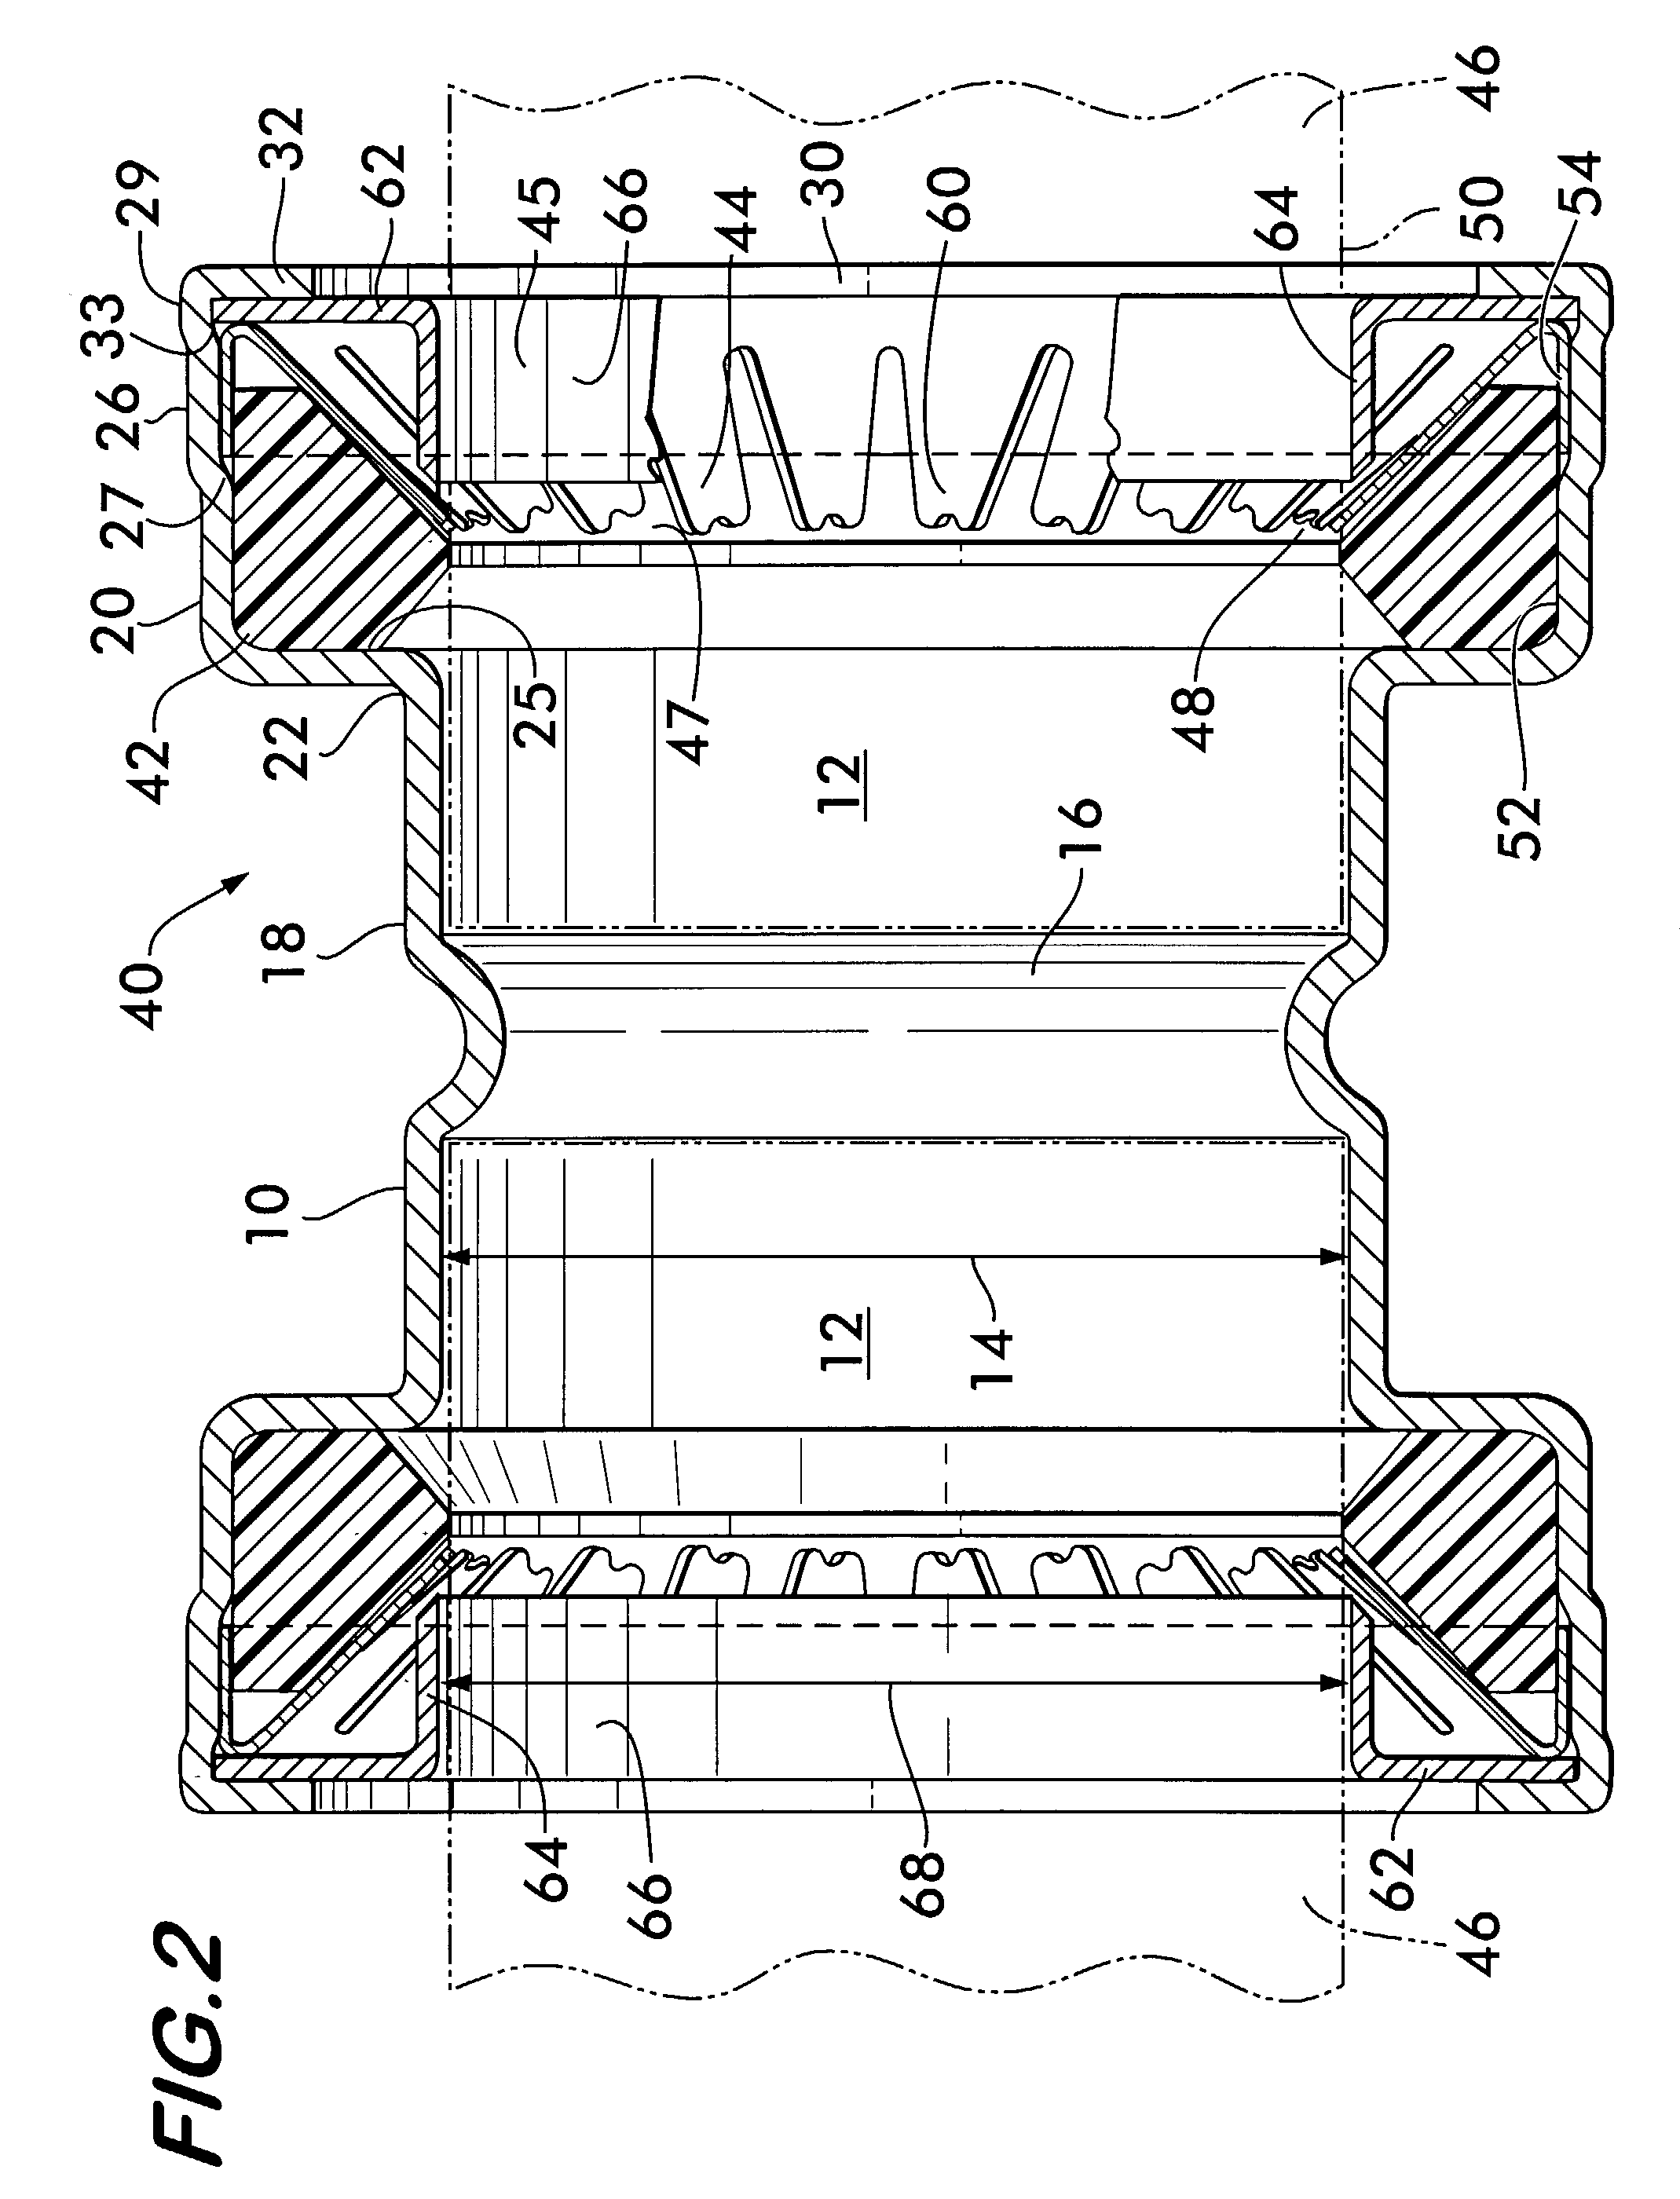 Triple-expanded mechanical pipe coupling derived from a standard fitting